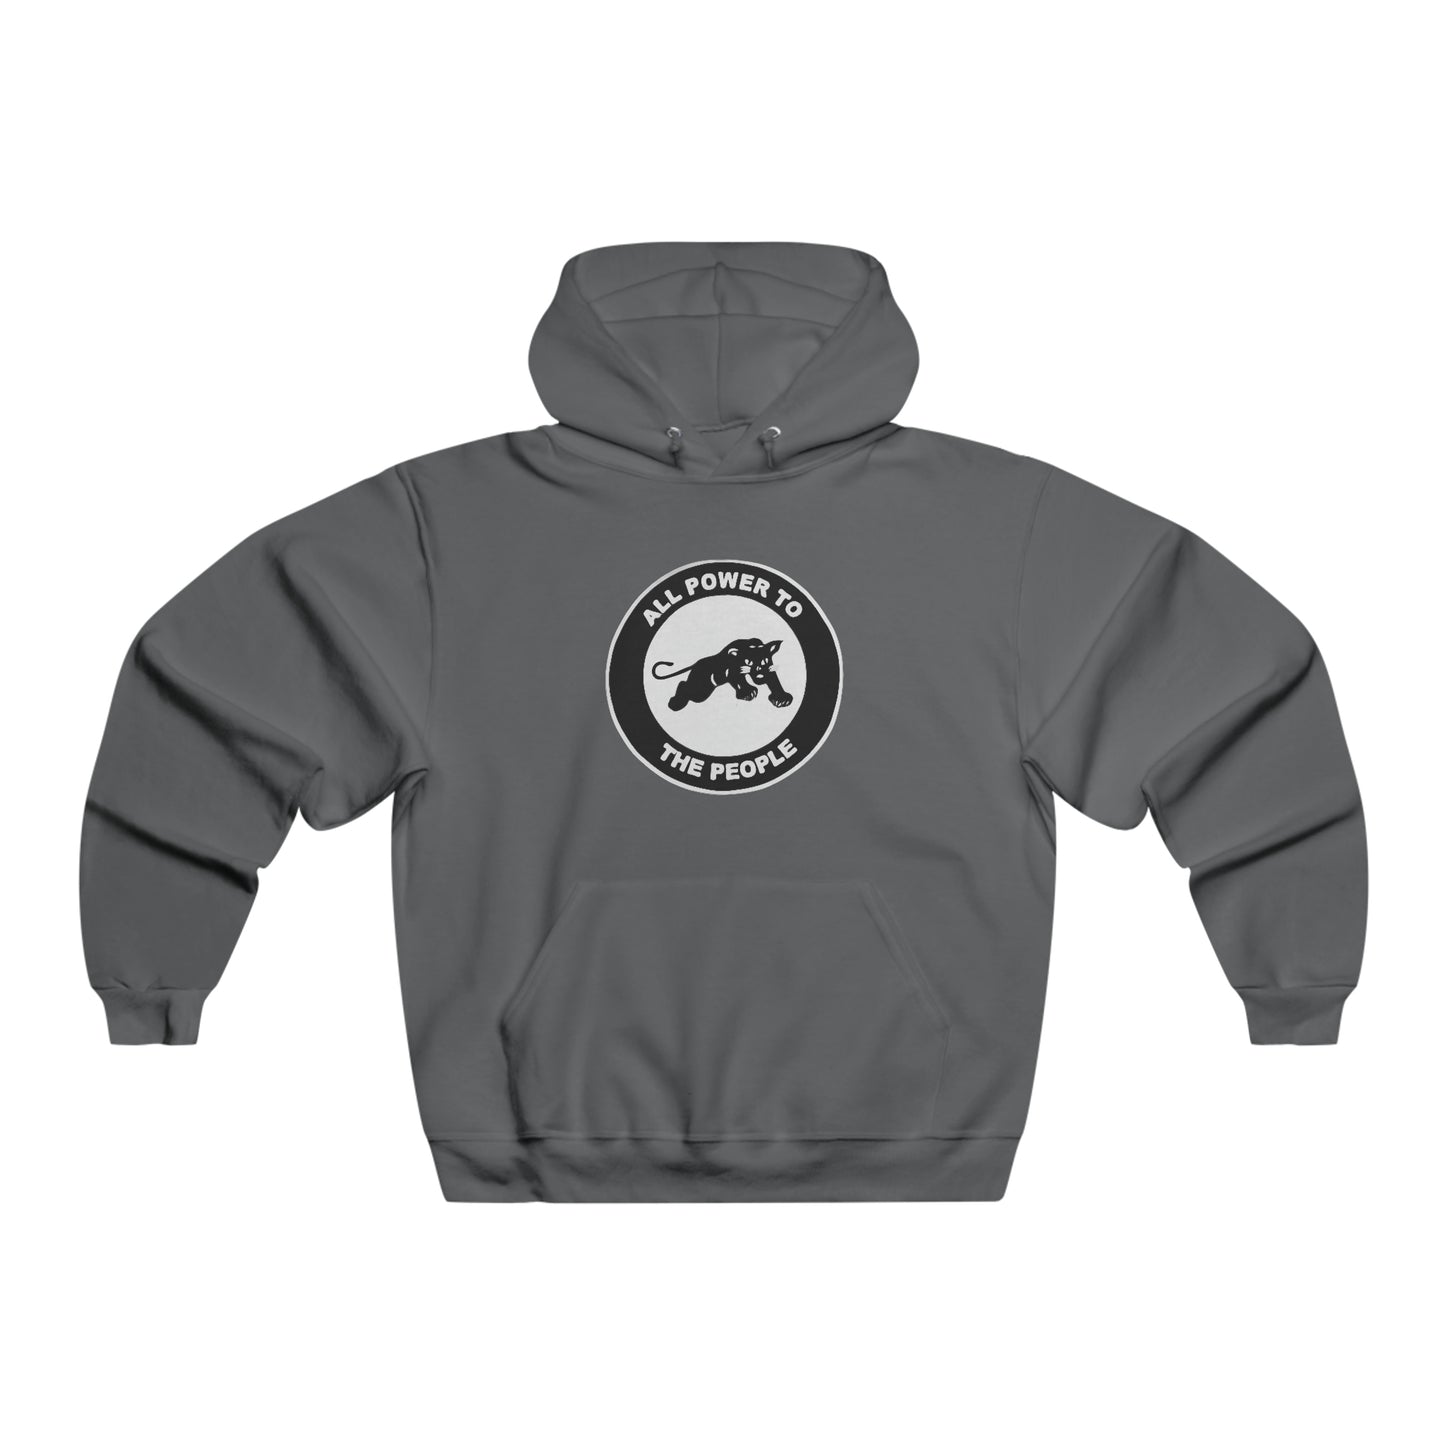 Huey P Newton Panther Party Graphic  Hoodie